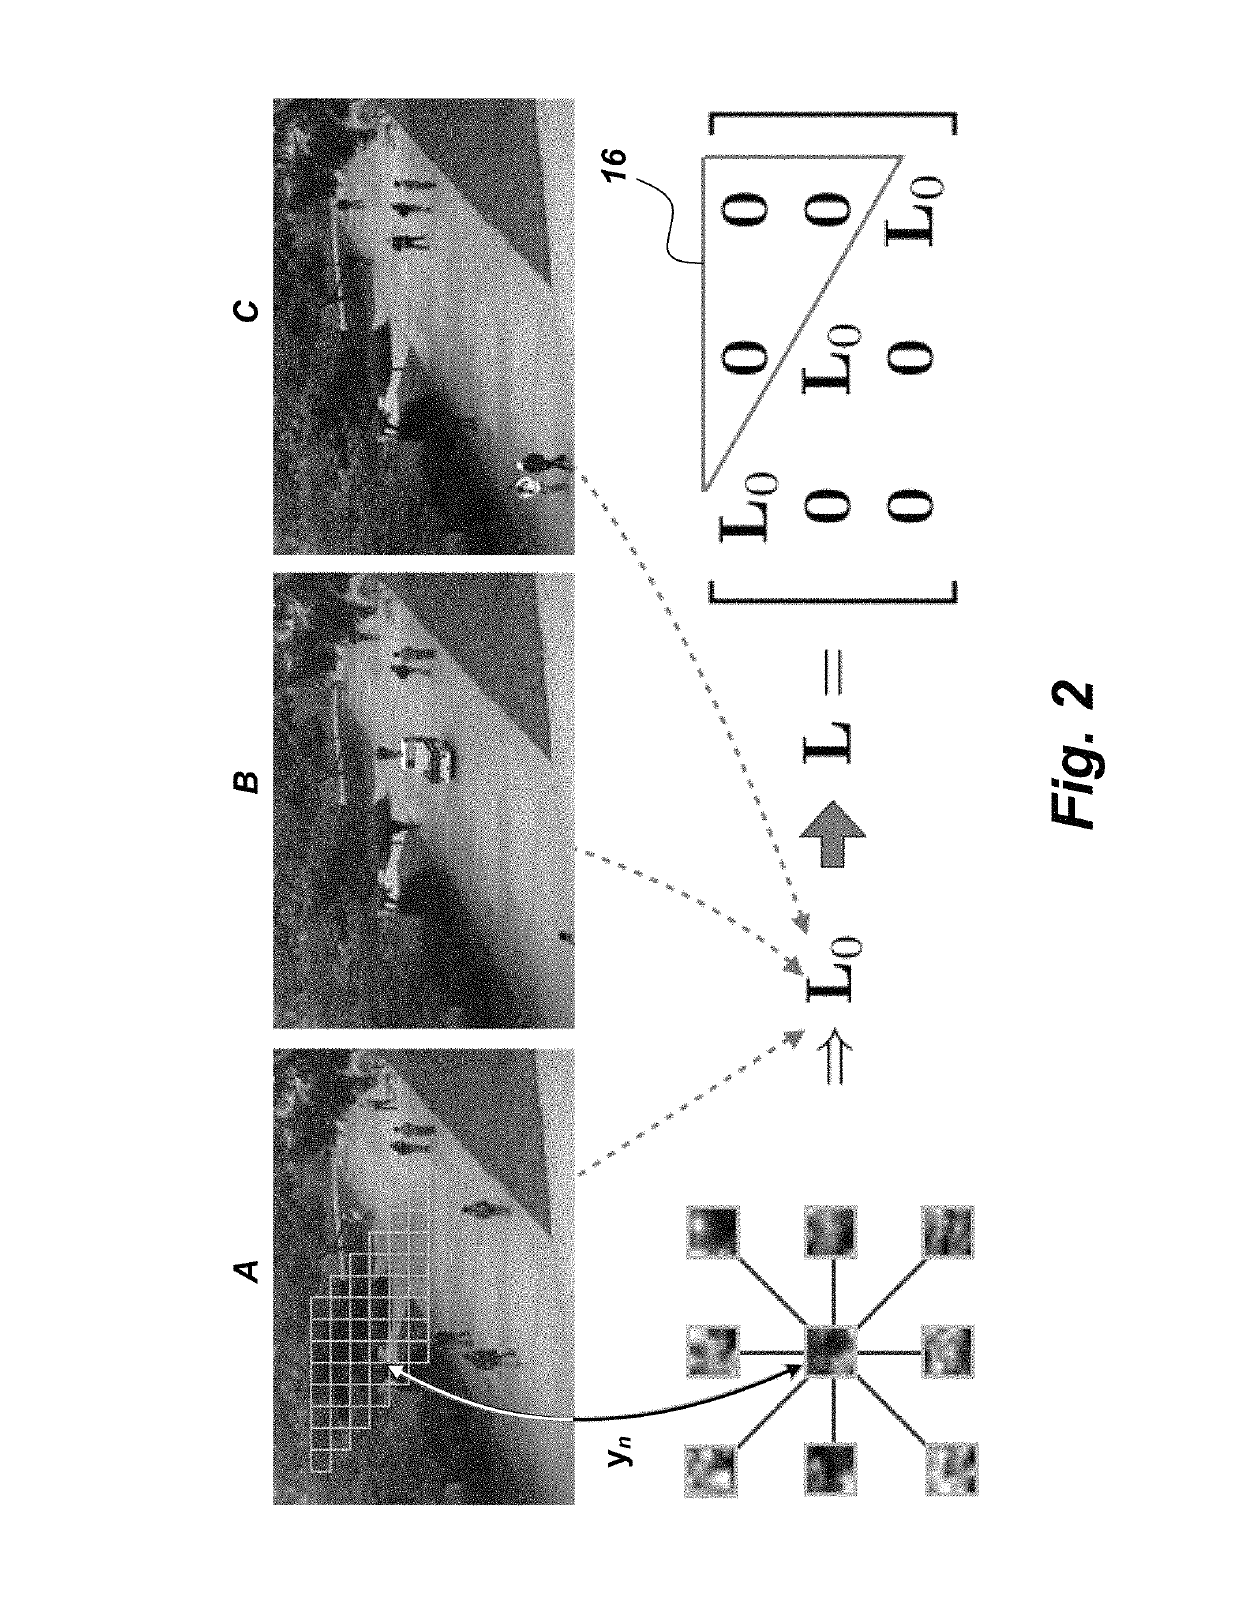 Spatiotemporal method for anomaly detection in dictionary learning and sparse signal recognition